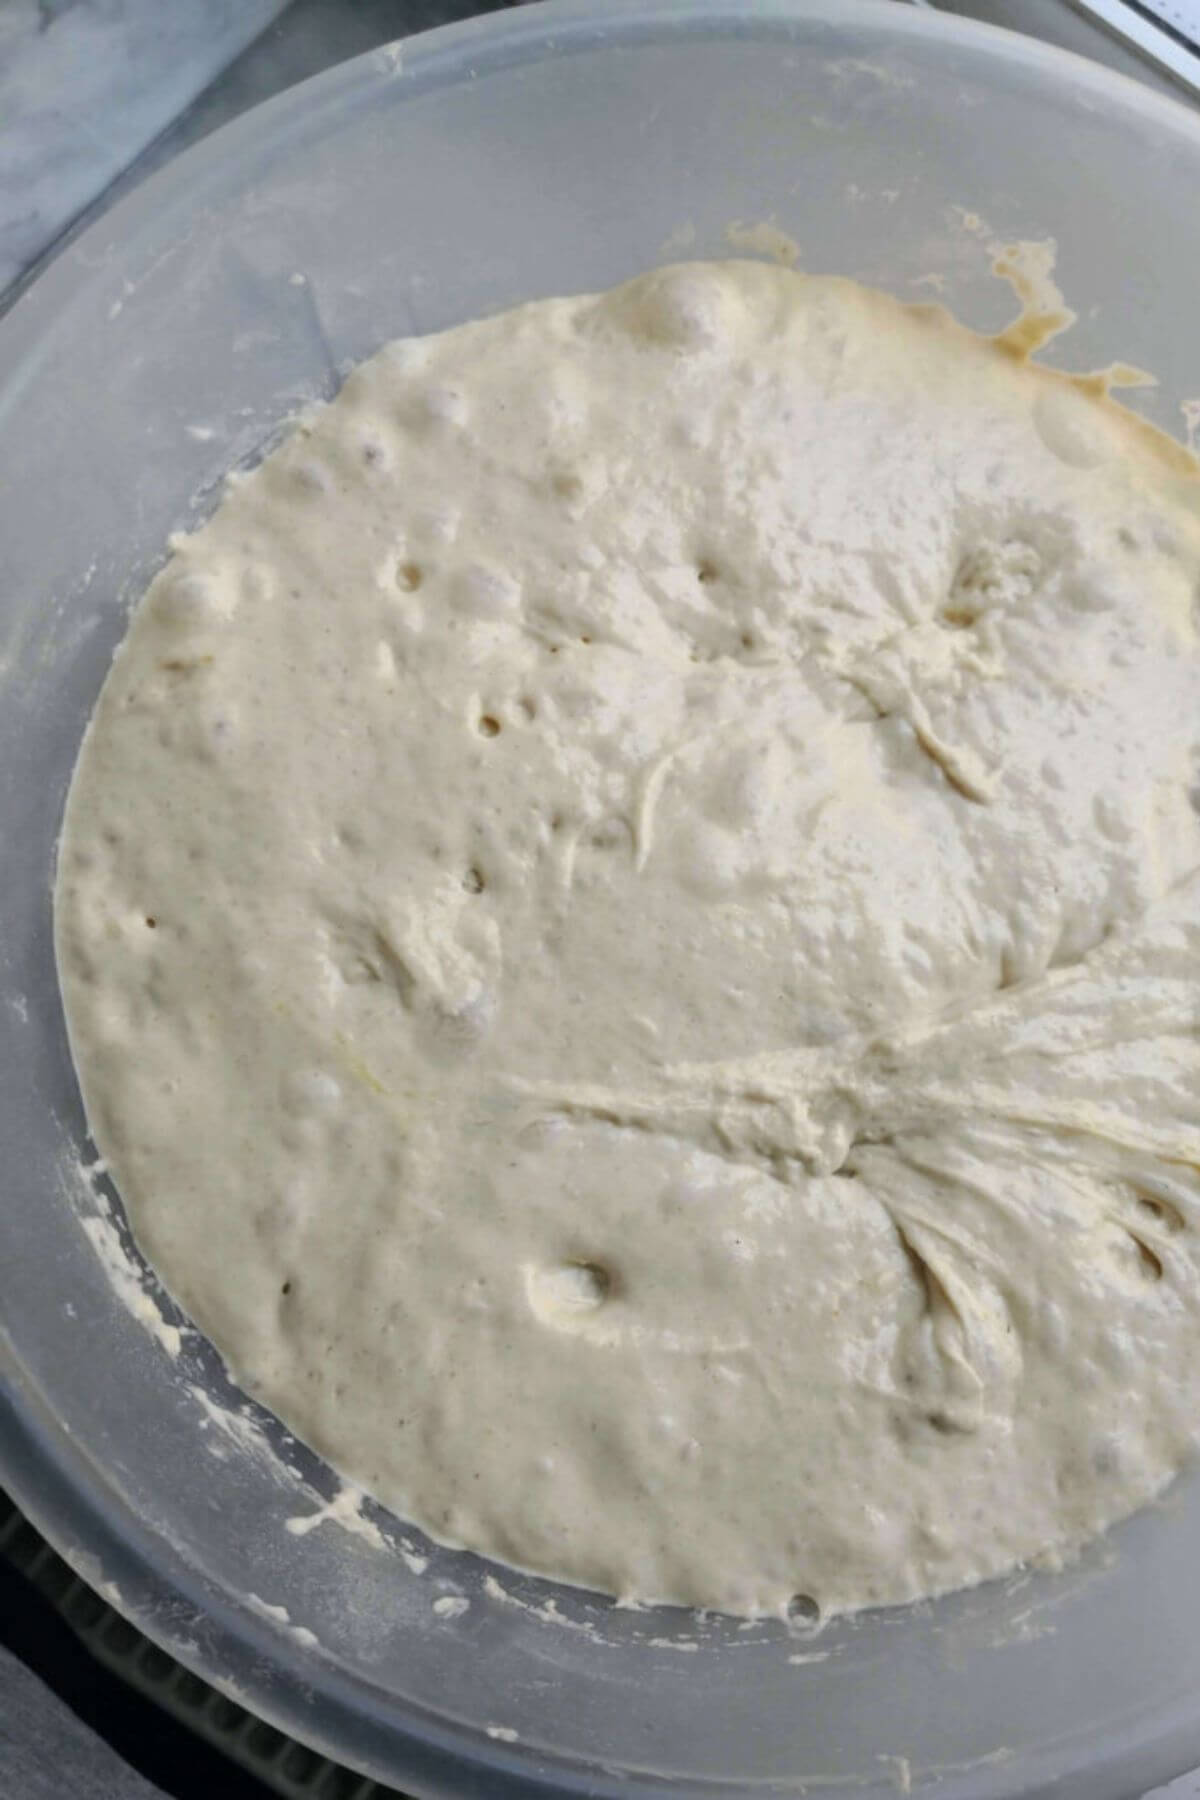 Focaccia dough after rising with lots of bubbles on top, in a large clear mixing bowl.